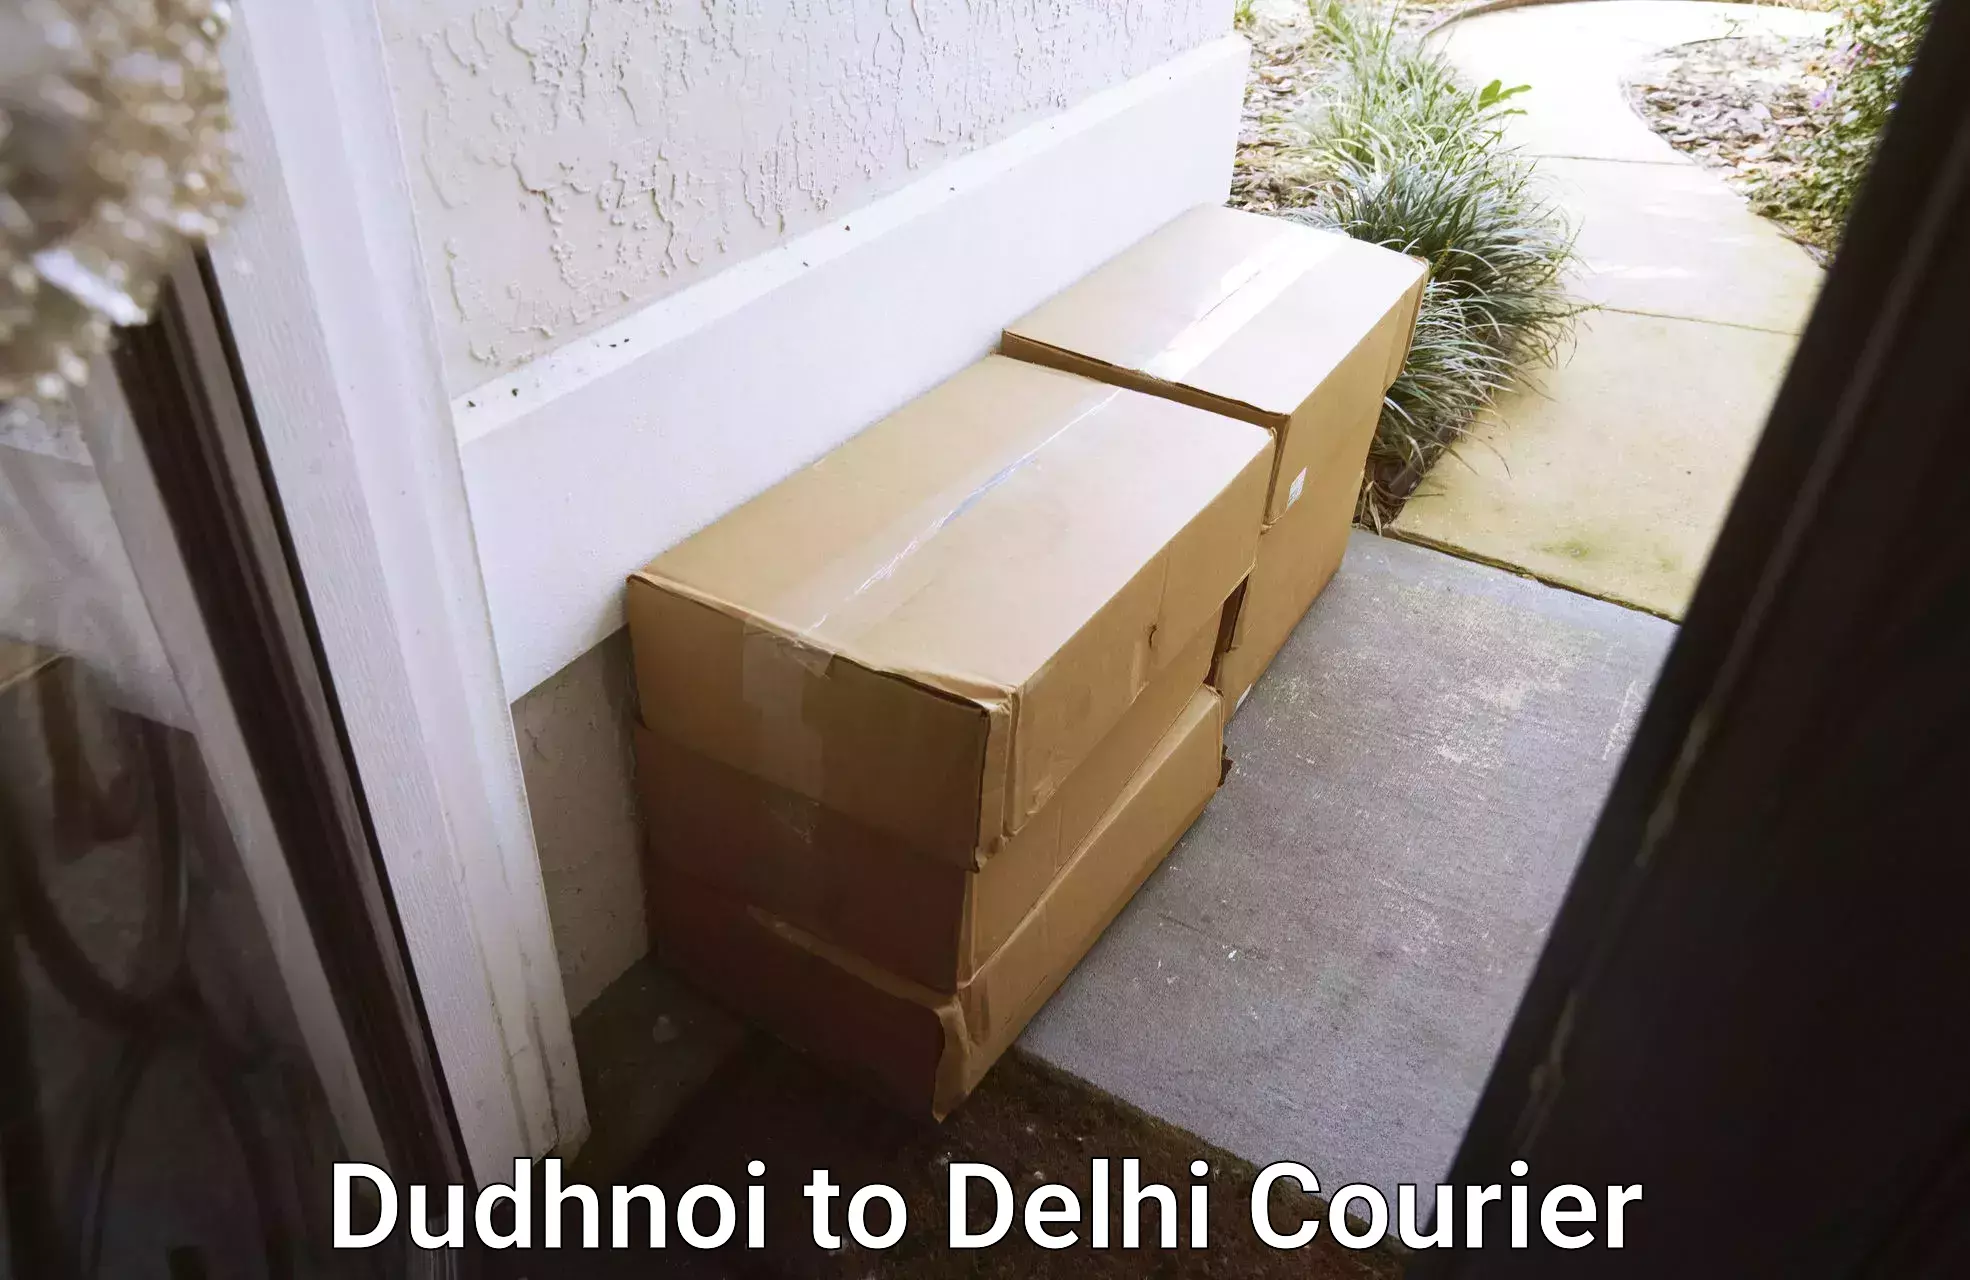 Online shipping calculator Dudhnoi to University of Delhi